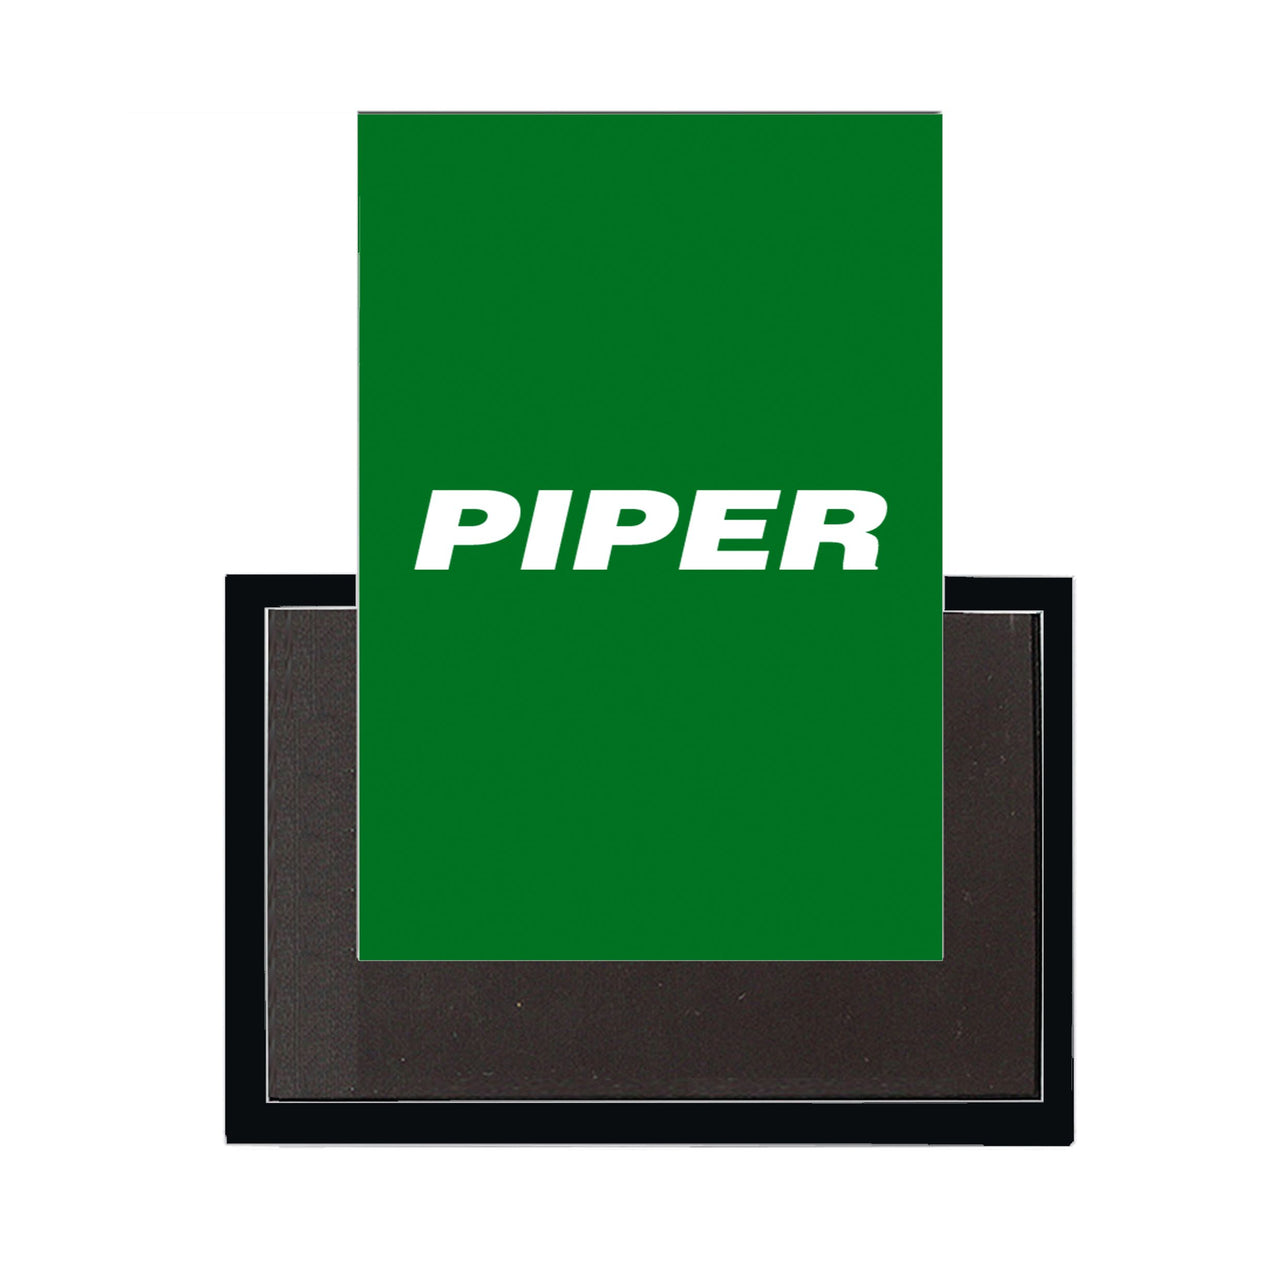 Piper & Text Designed Magnets